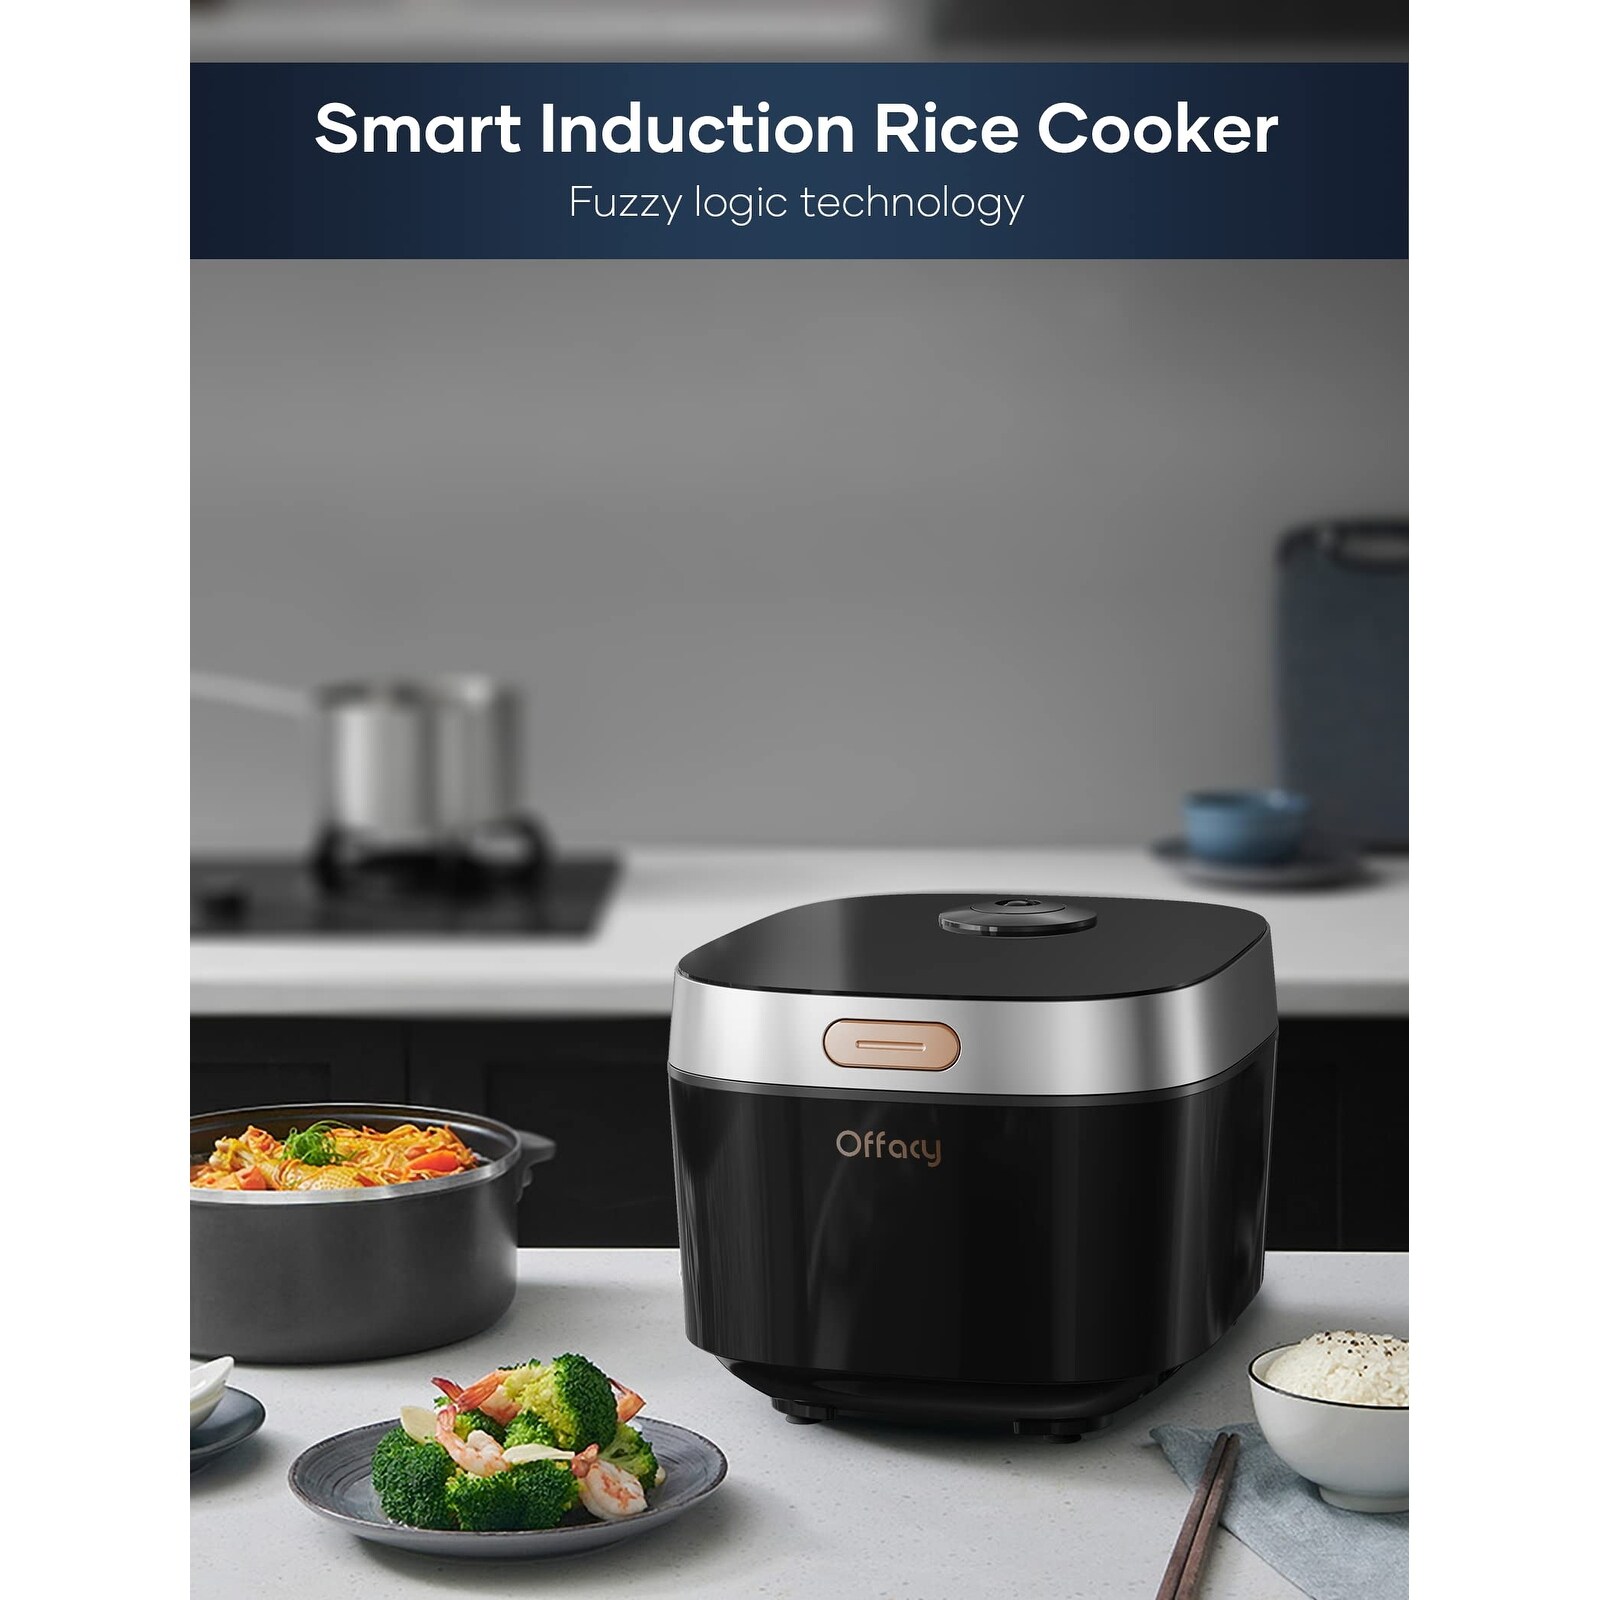 Panasonic 4-Cup Mircocomputer Rice Cooker White - Bed Bath